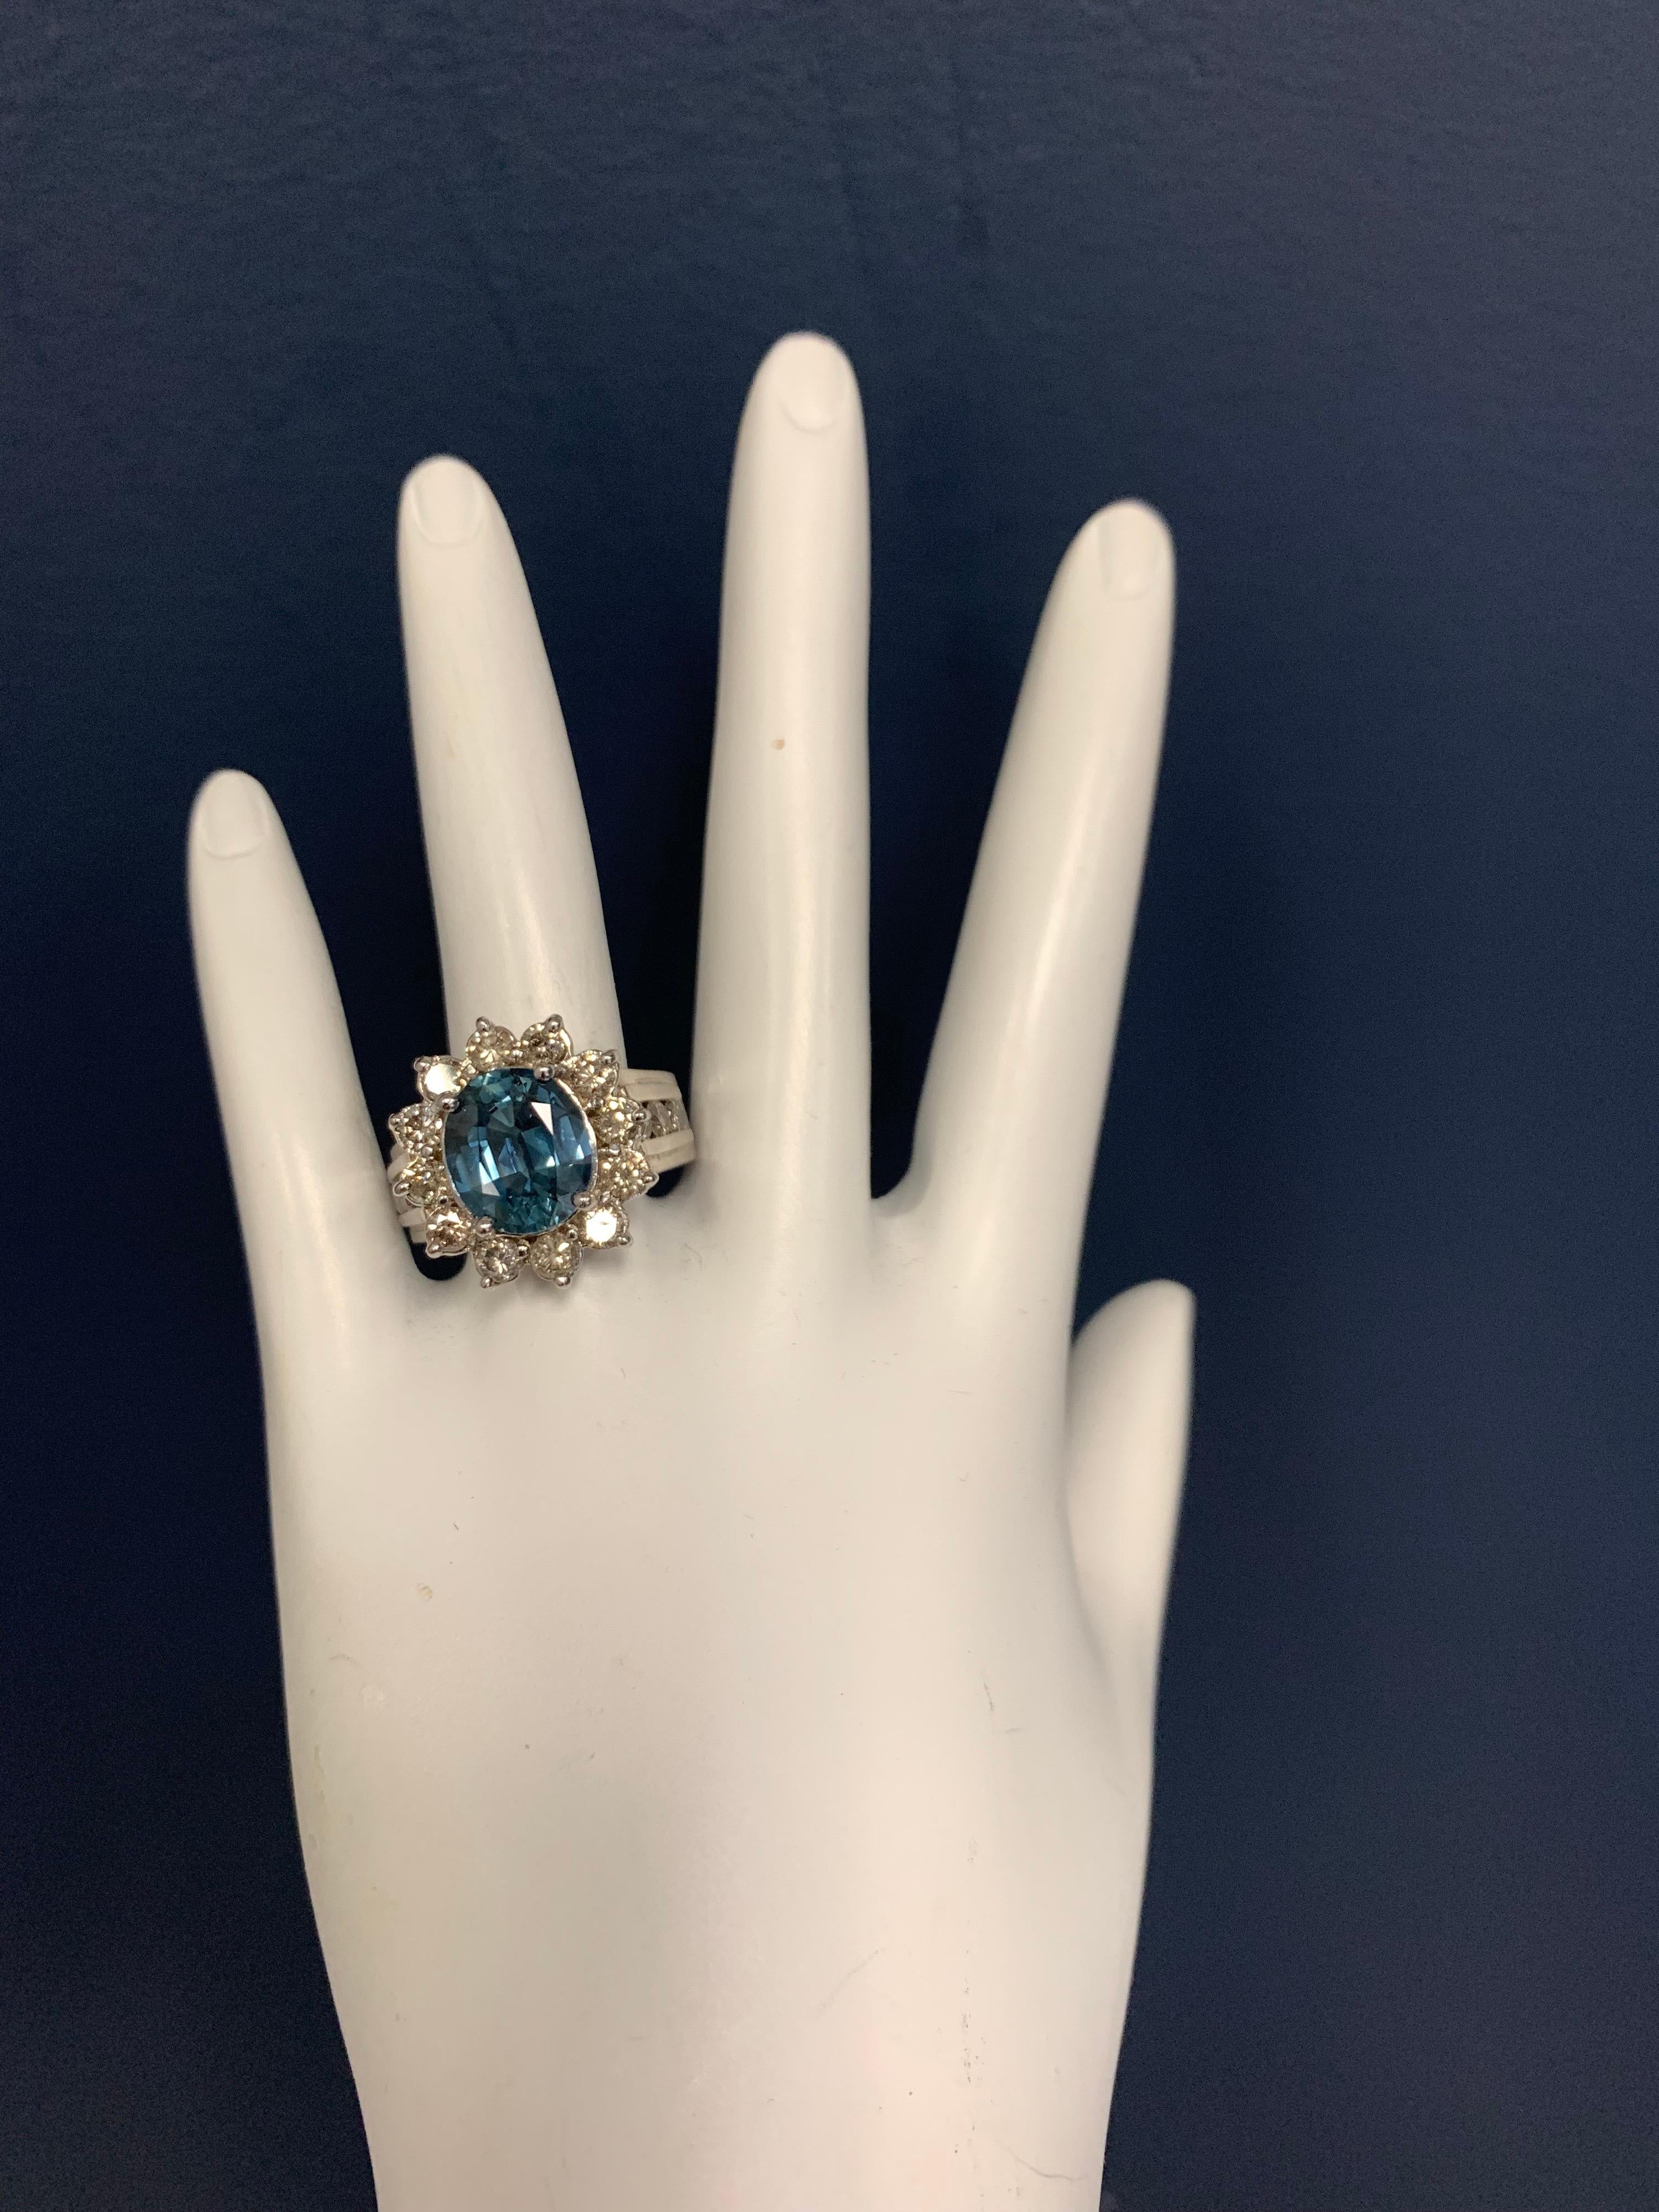 A magnificent 14k White Gold Oval Natural Sapphire and Diamond Cocktail Ring (size 7). Set in the center is a 4.97 carat Oval Sapphire measuring 11.24x9.45x5.37mm. The mounting is set with 18 Natural Round Brilliant Diamonds graded approximately as